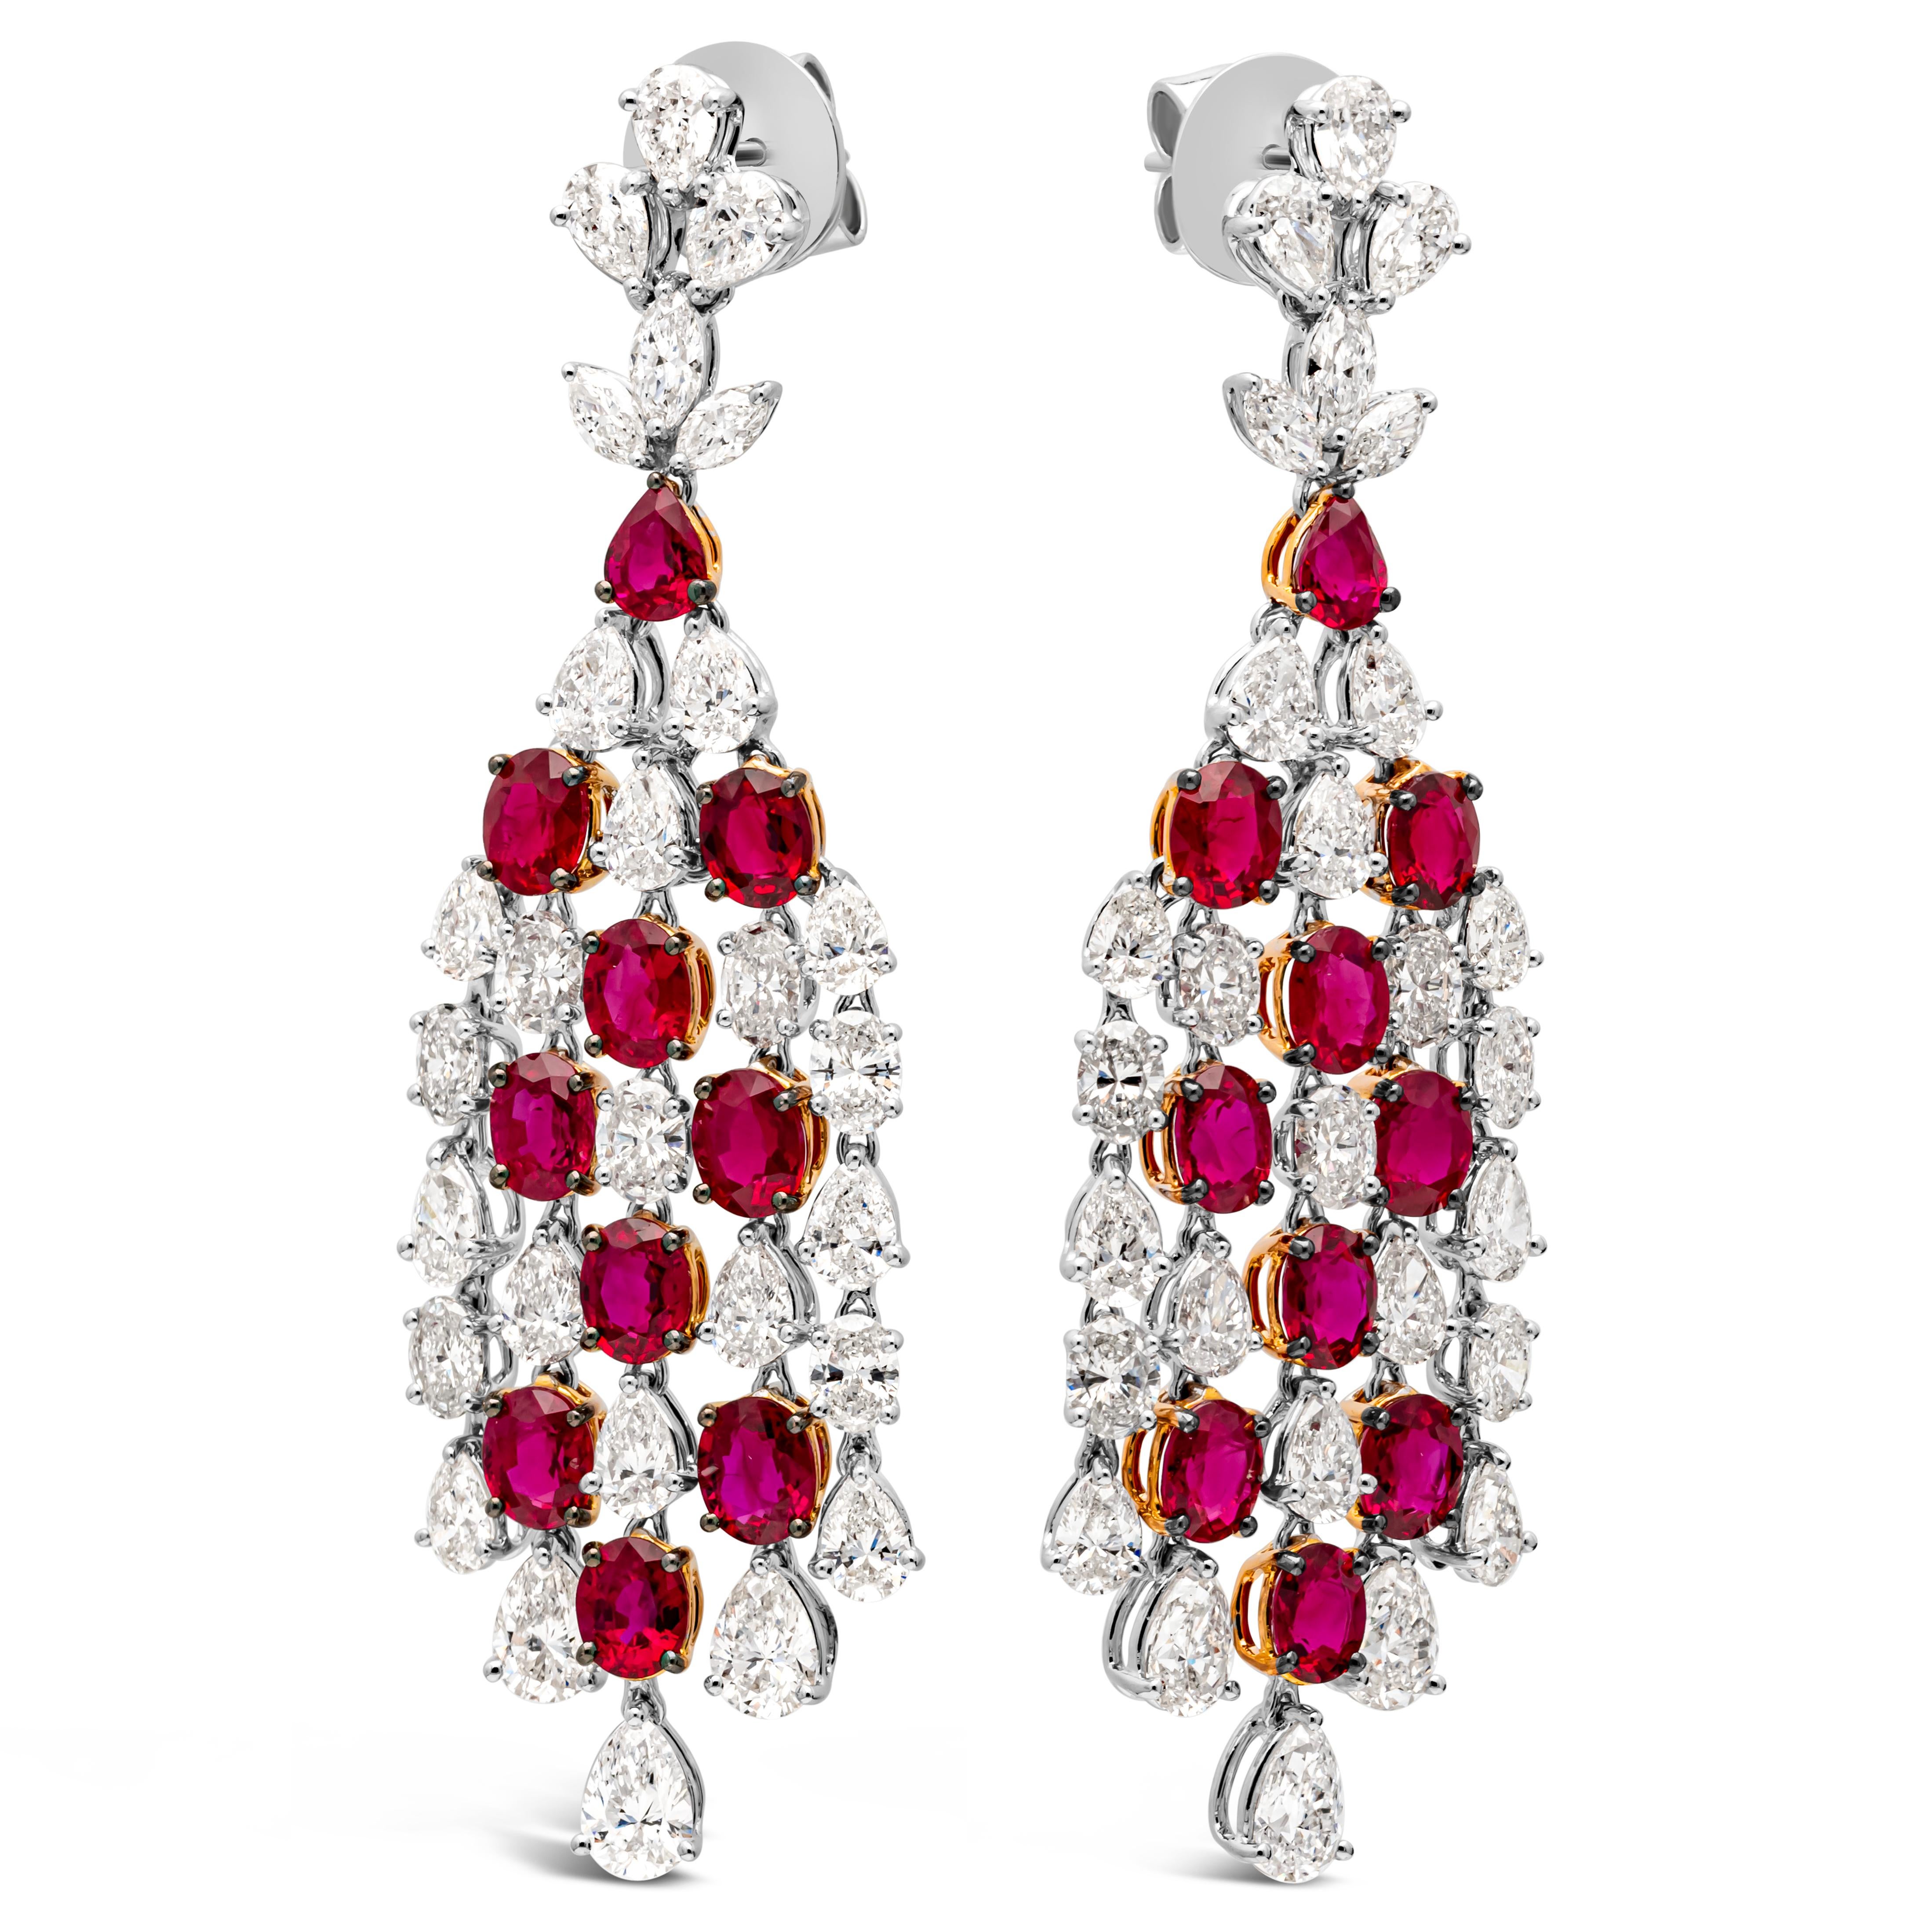 A delicate and exquisite pair of chandelier earrings, showcasing 18 oval cut and 1 pear shape color-rich rubies weighing 9.00 carats total and 9.10 carats total of brilliant oval, pear, and marquise cut diamonds set on an elegant chandelier